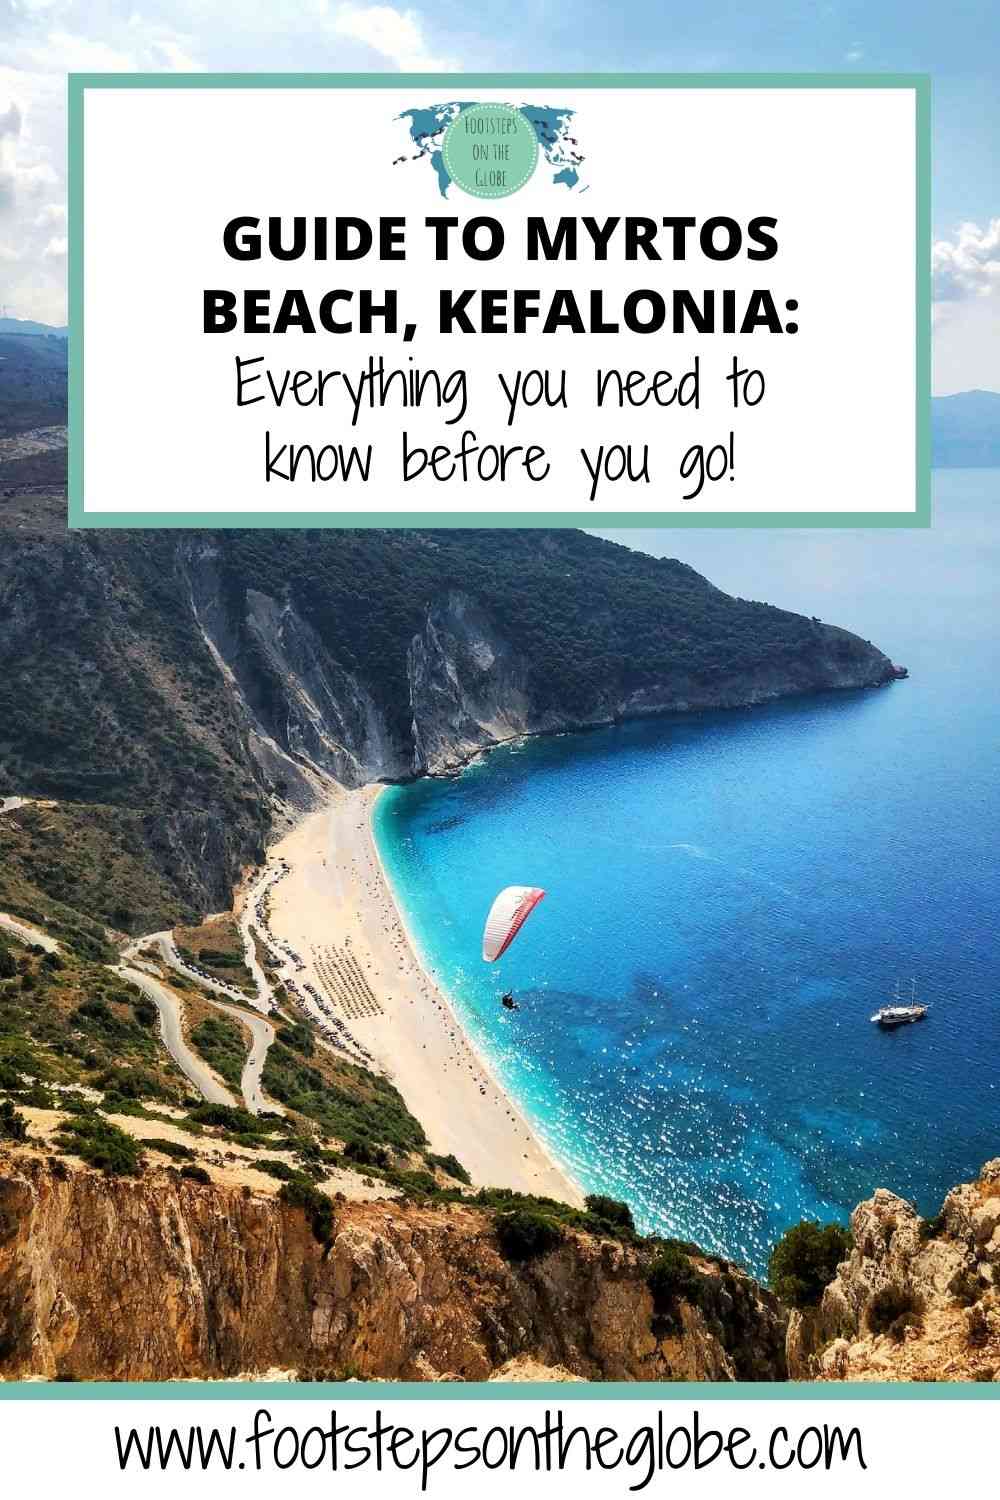 Pinterest image of Myrtos Beach in Kefalonia with someone paragliding over the cove with the text: "GUIDE TO MYRTOS BEACH, KEFALONIA: Everything you need to know before you go!"